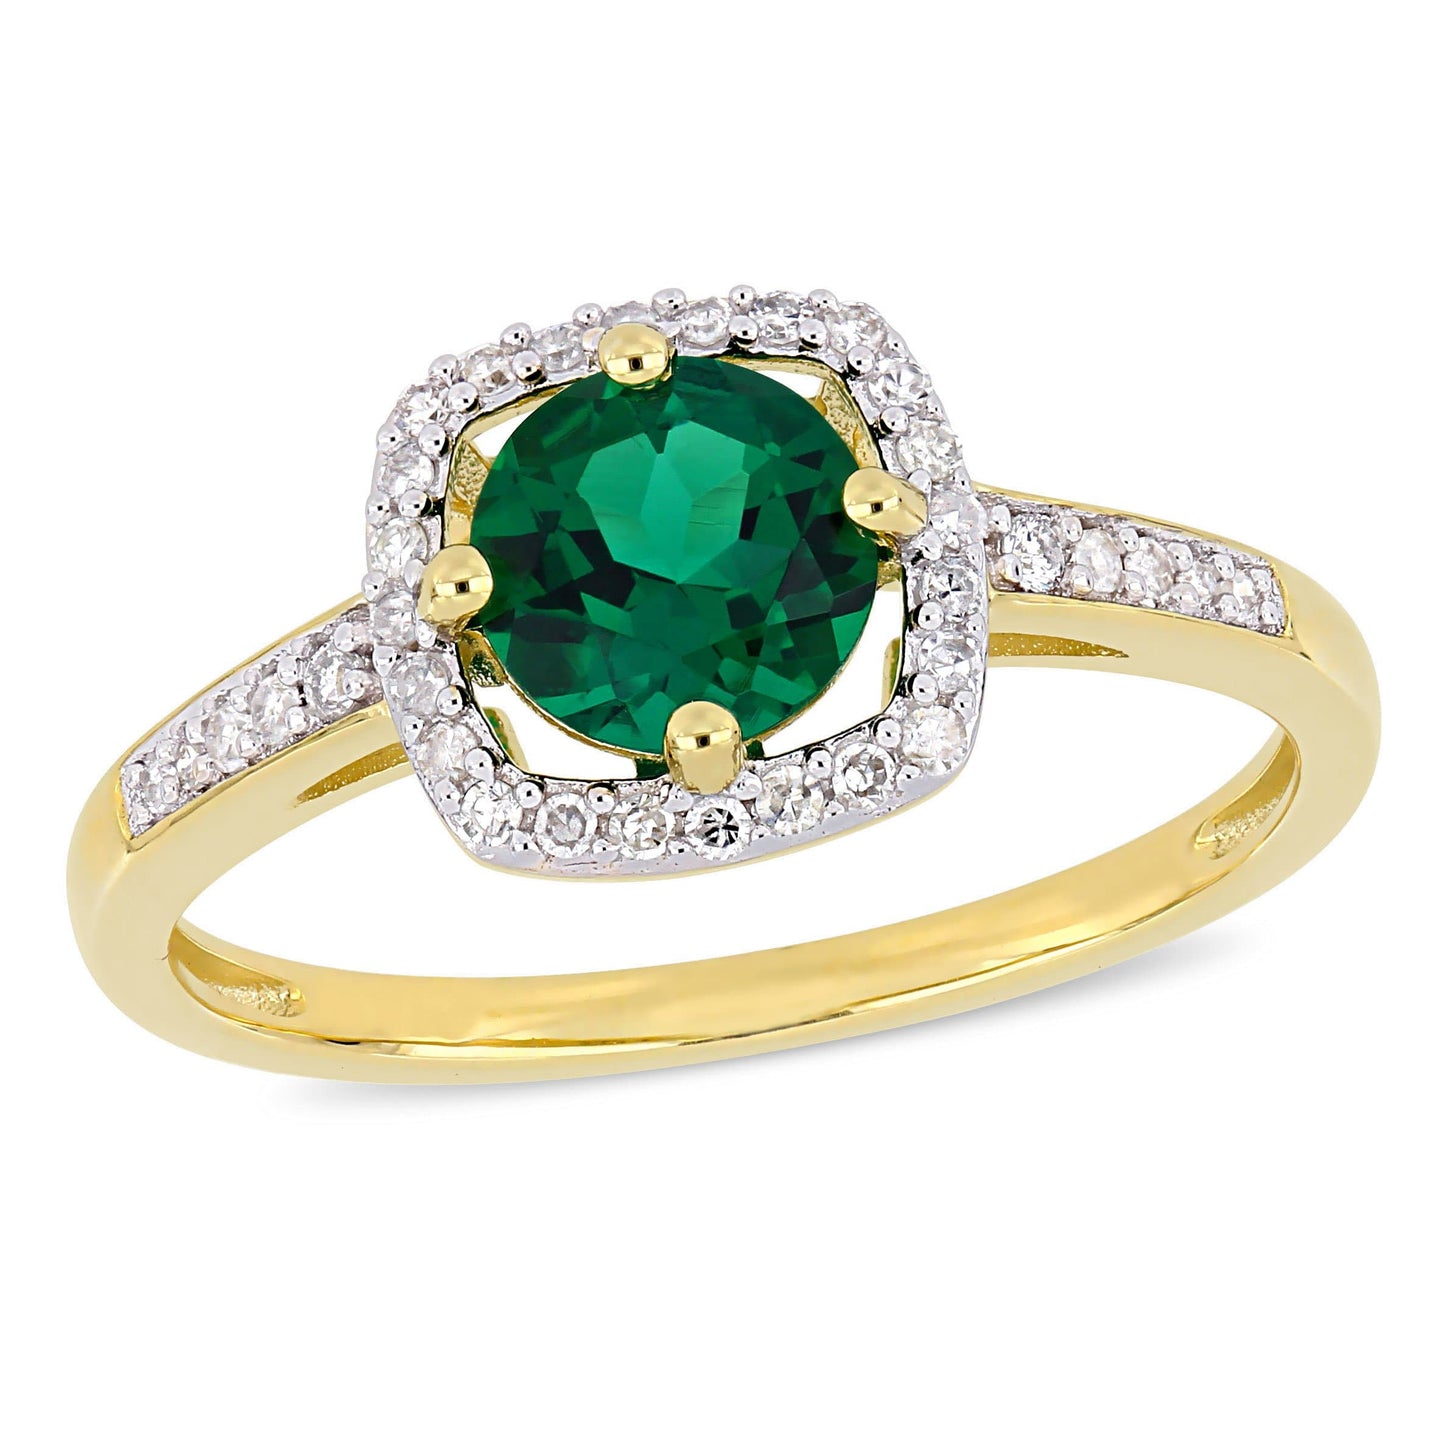 Julie Leah Emerald & Diamond Halo Ring in 10k Yellow Gold